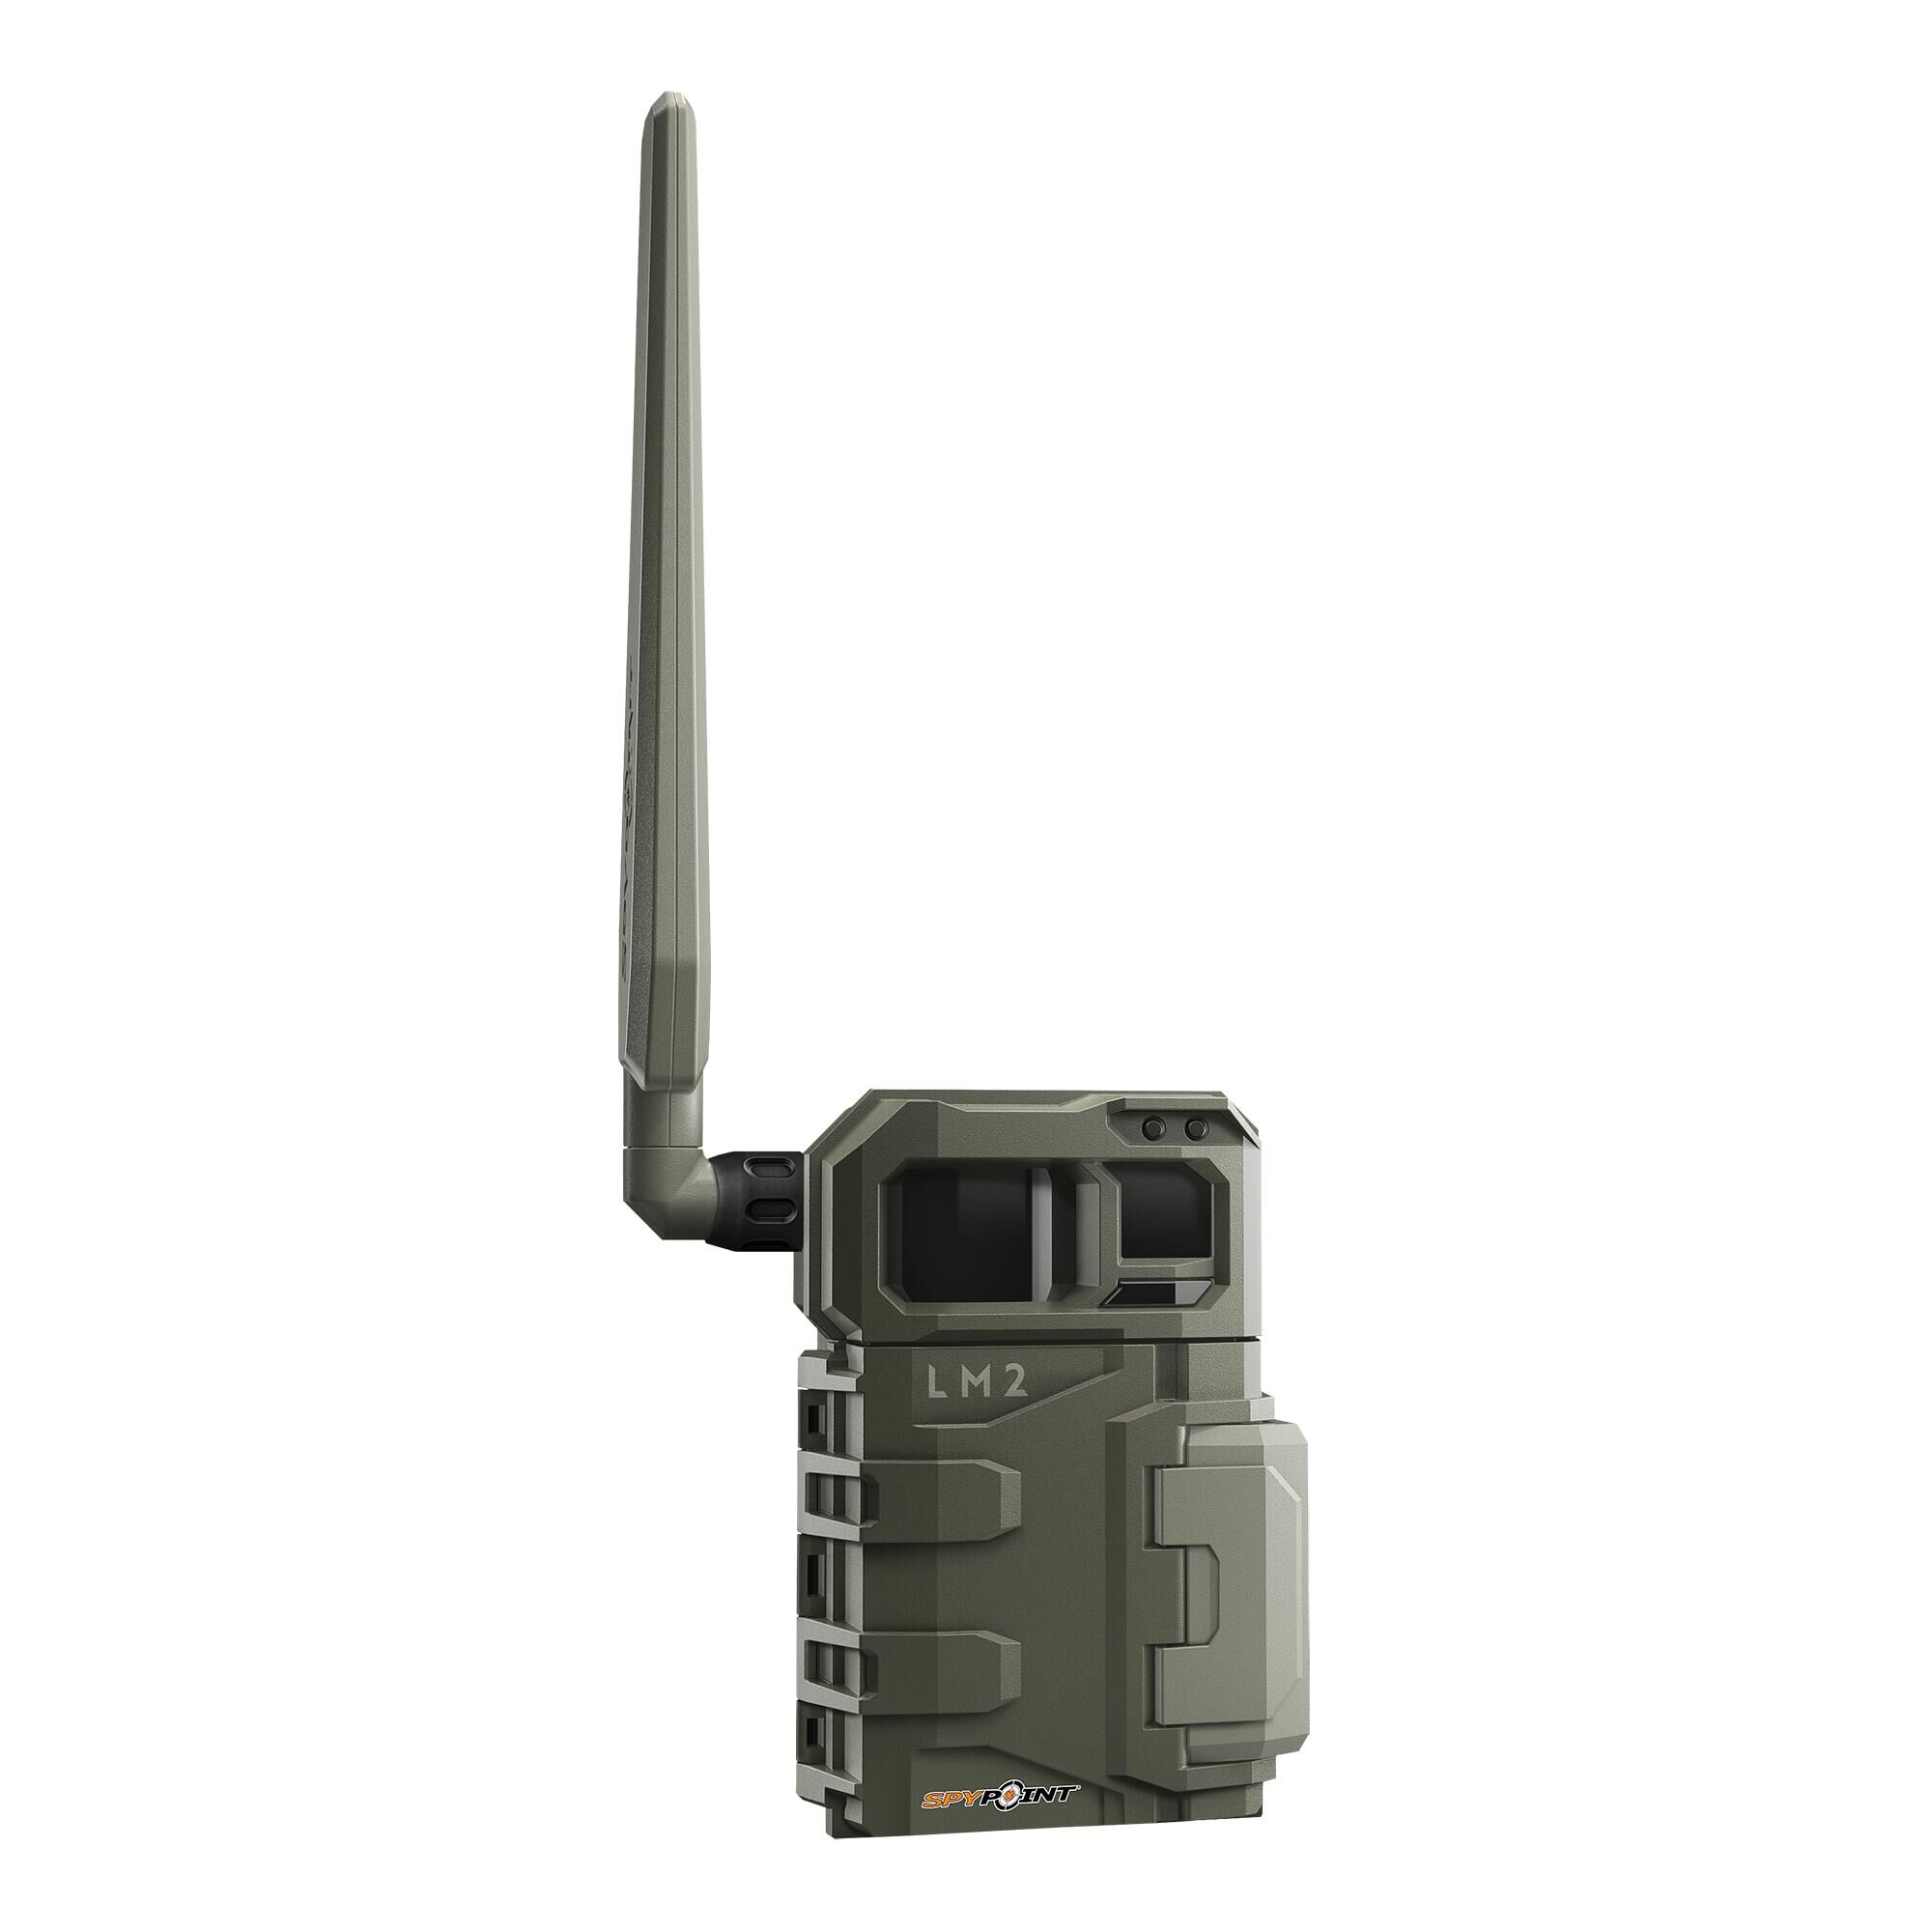 SPYPOINT CELLULAR TRAIL CAMERA SPYPOINT LM2